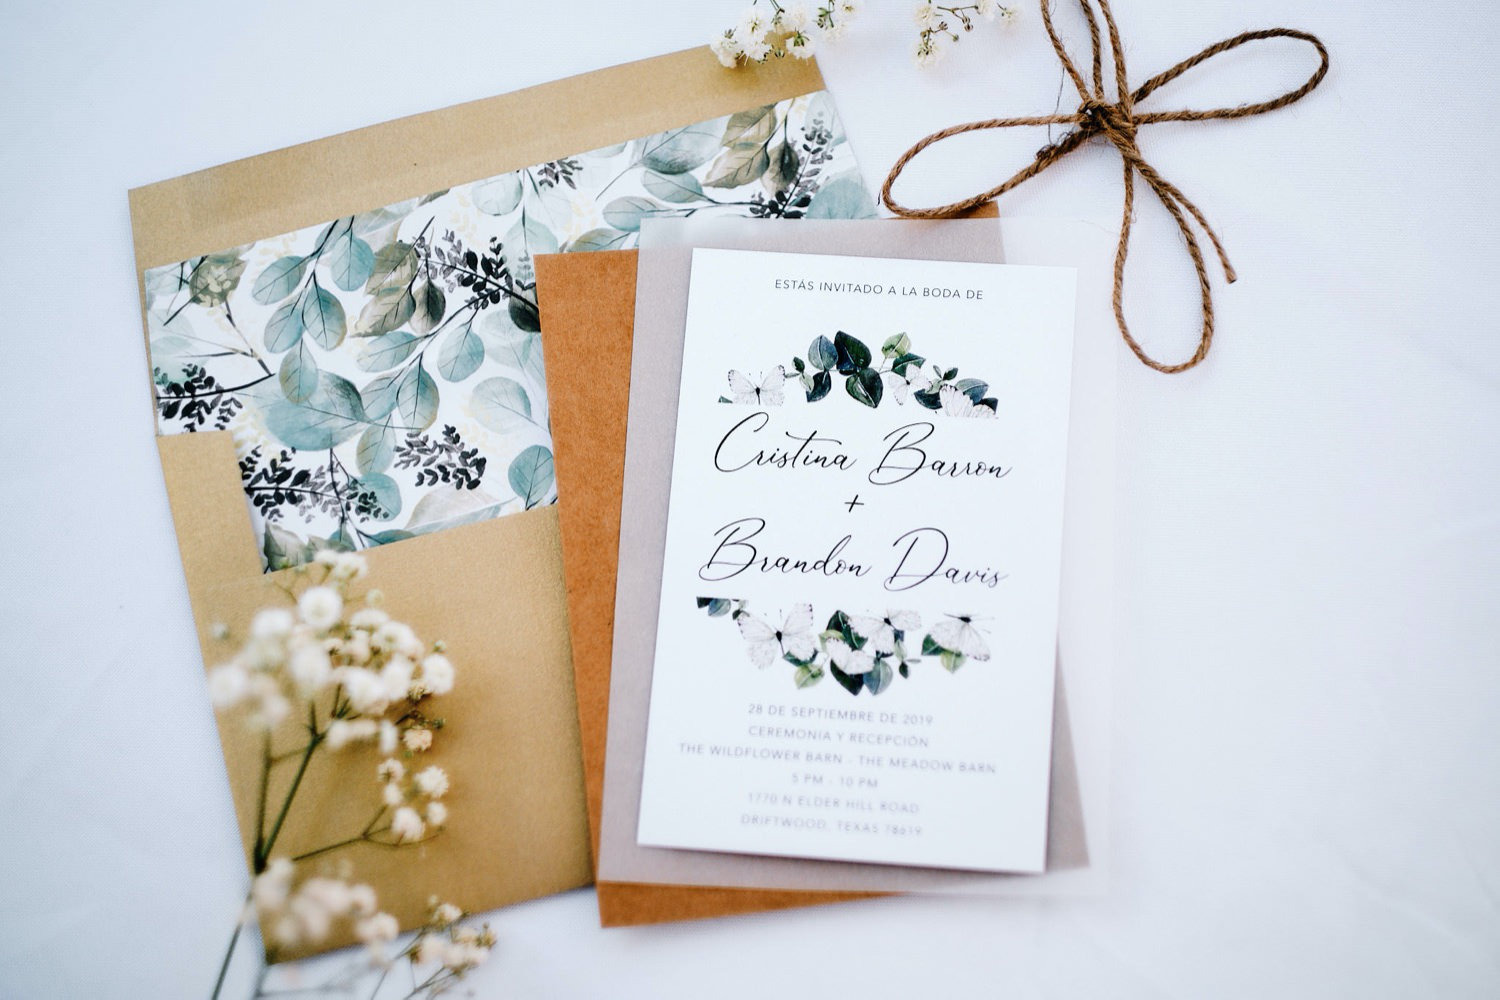 Cristina and Brandon's invitation suite. Photographed by Mercedes Morgan Photography for their Wildflower Barn wedding.